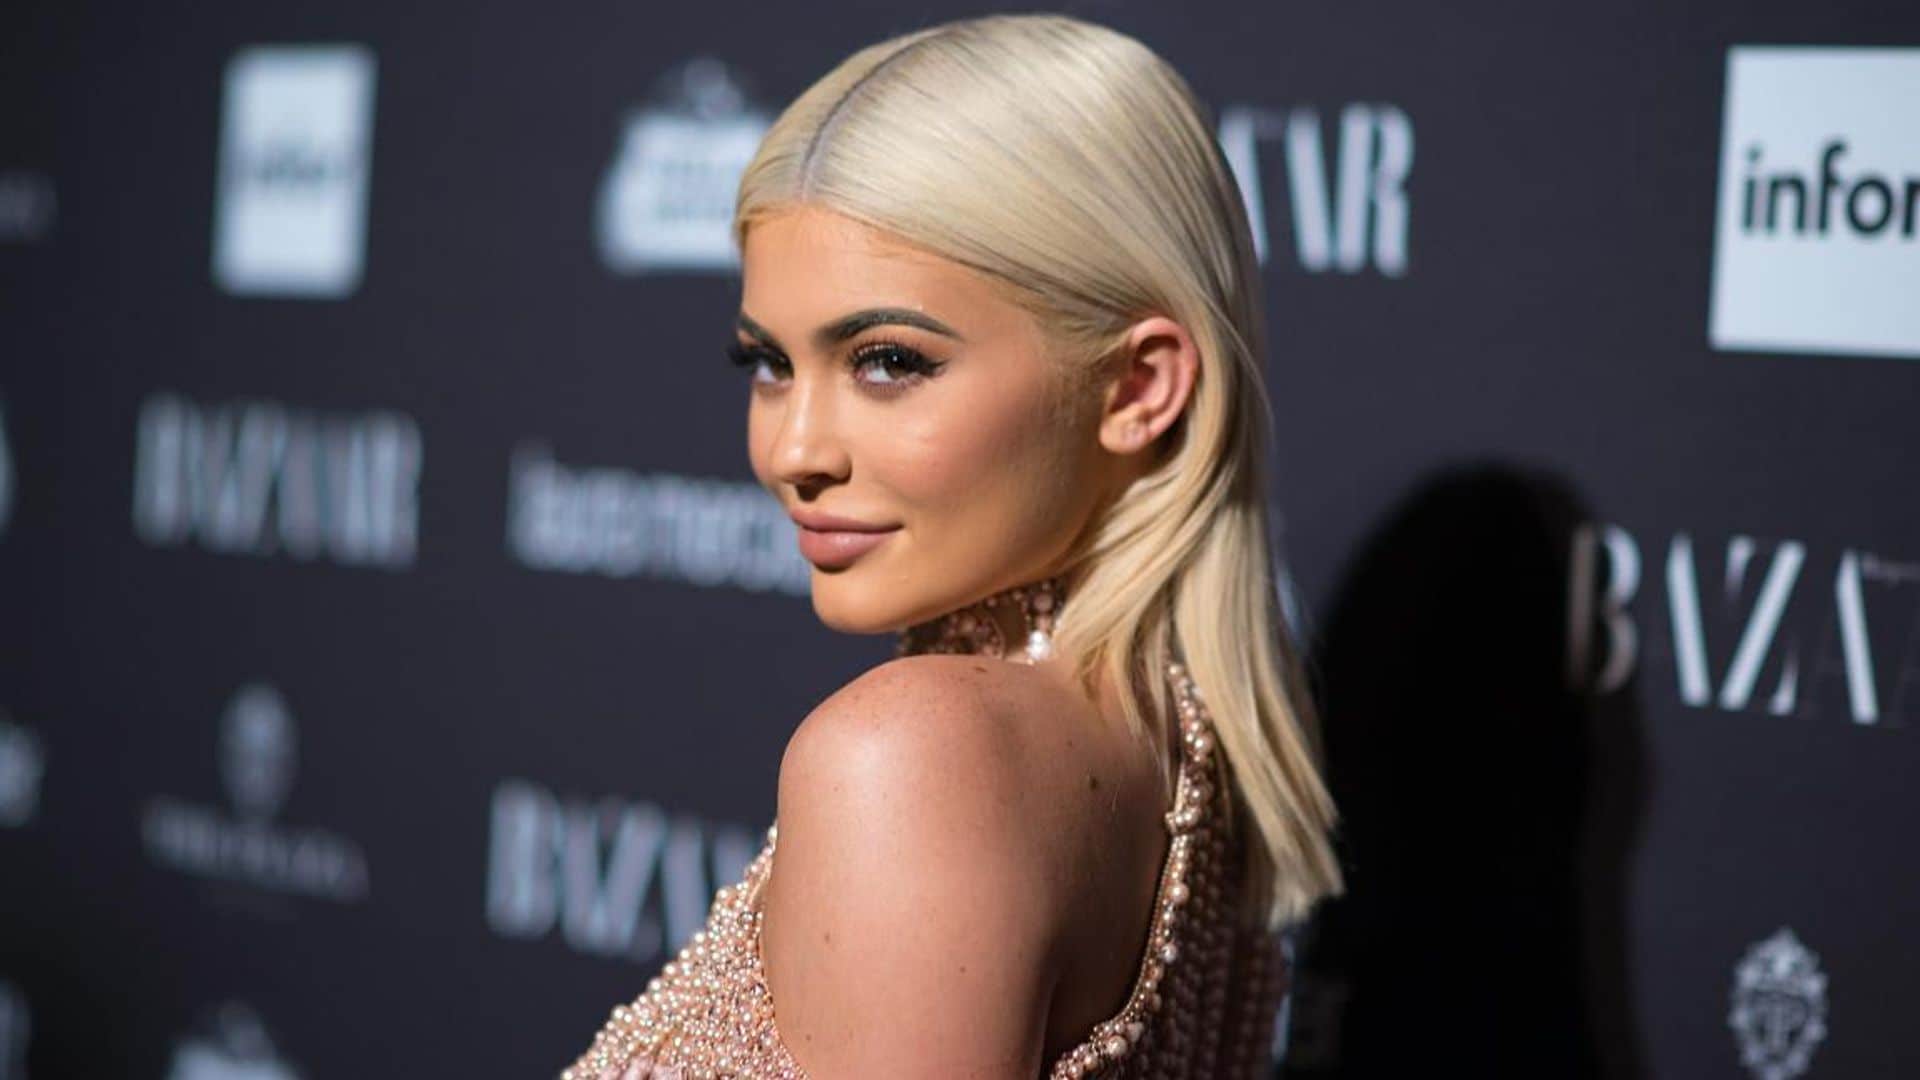 Kylie Jenner outranks Kim Kardashian and Kanye West in Forbes’ 100 highest-paid celebrity list